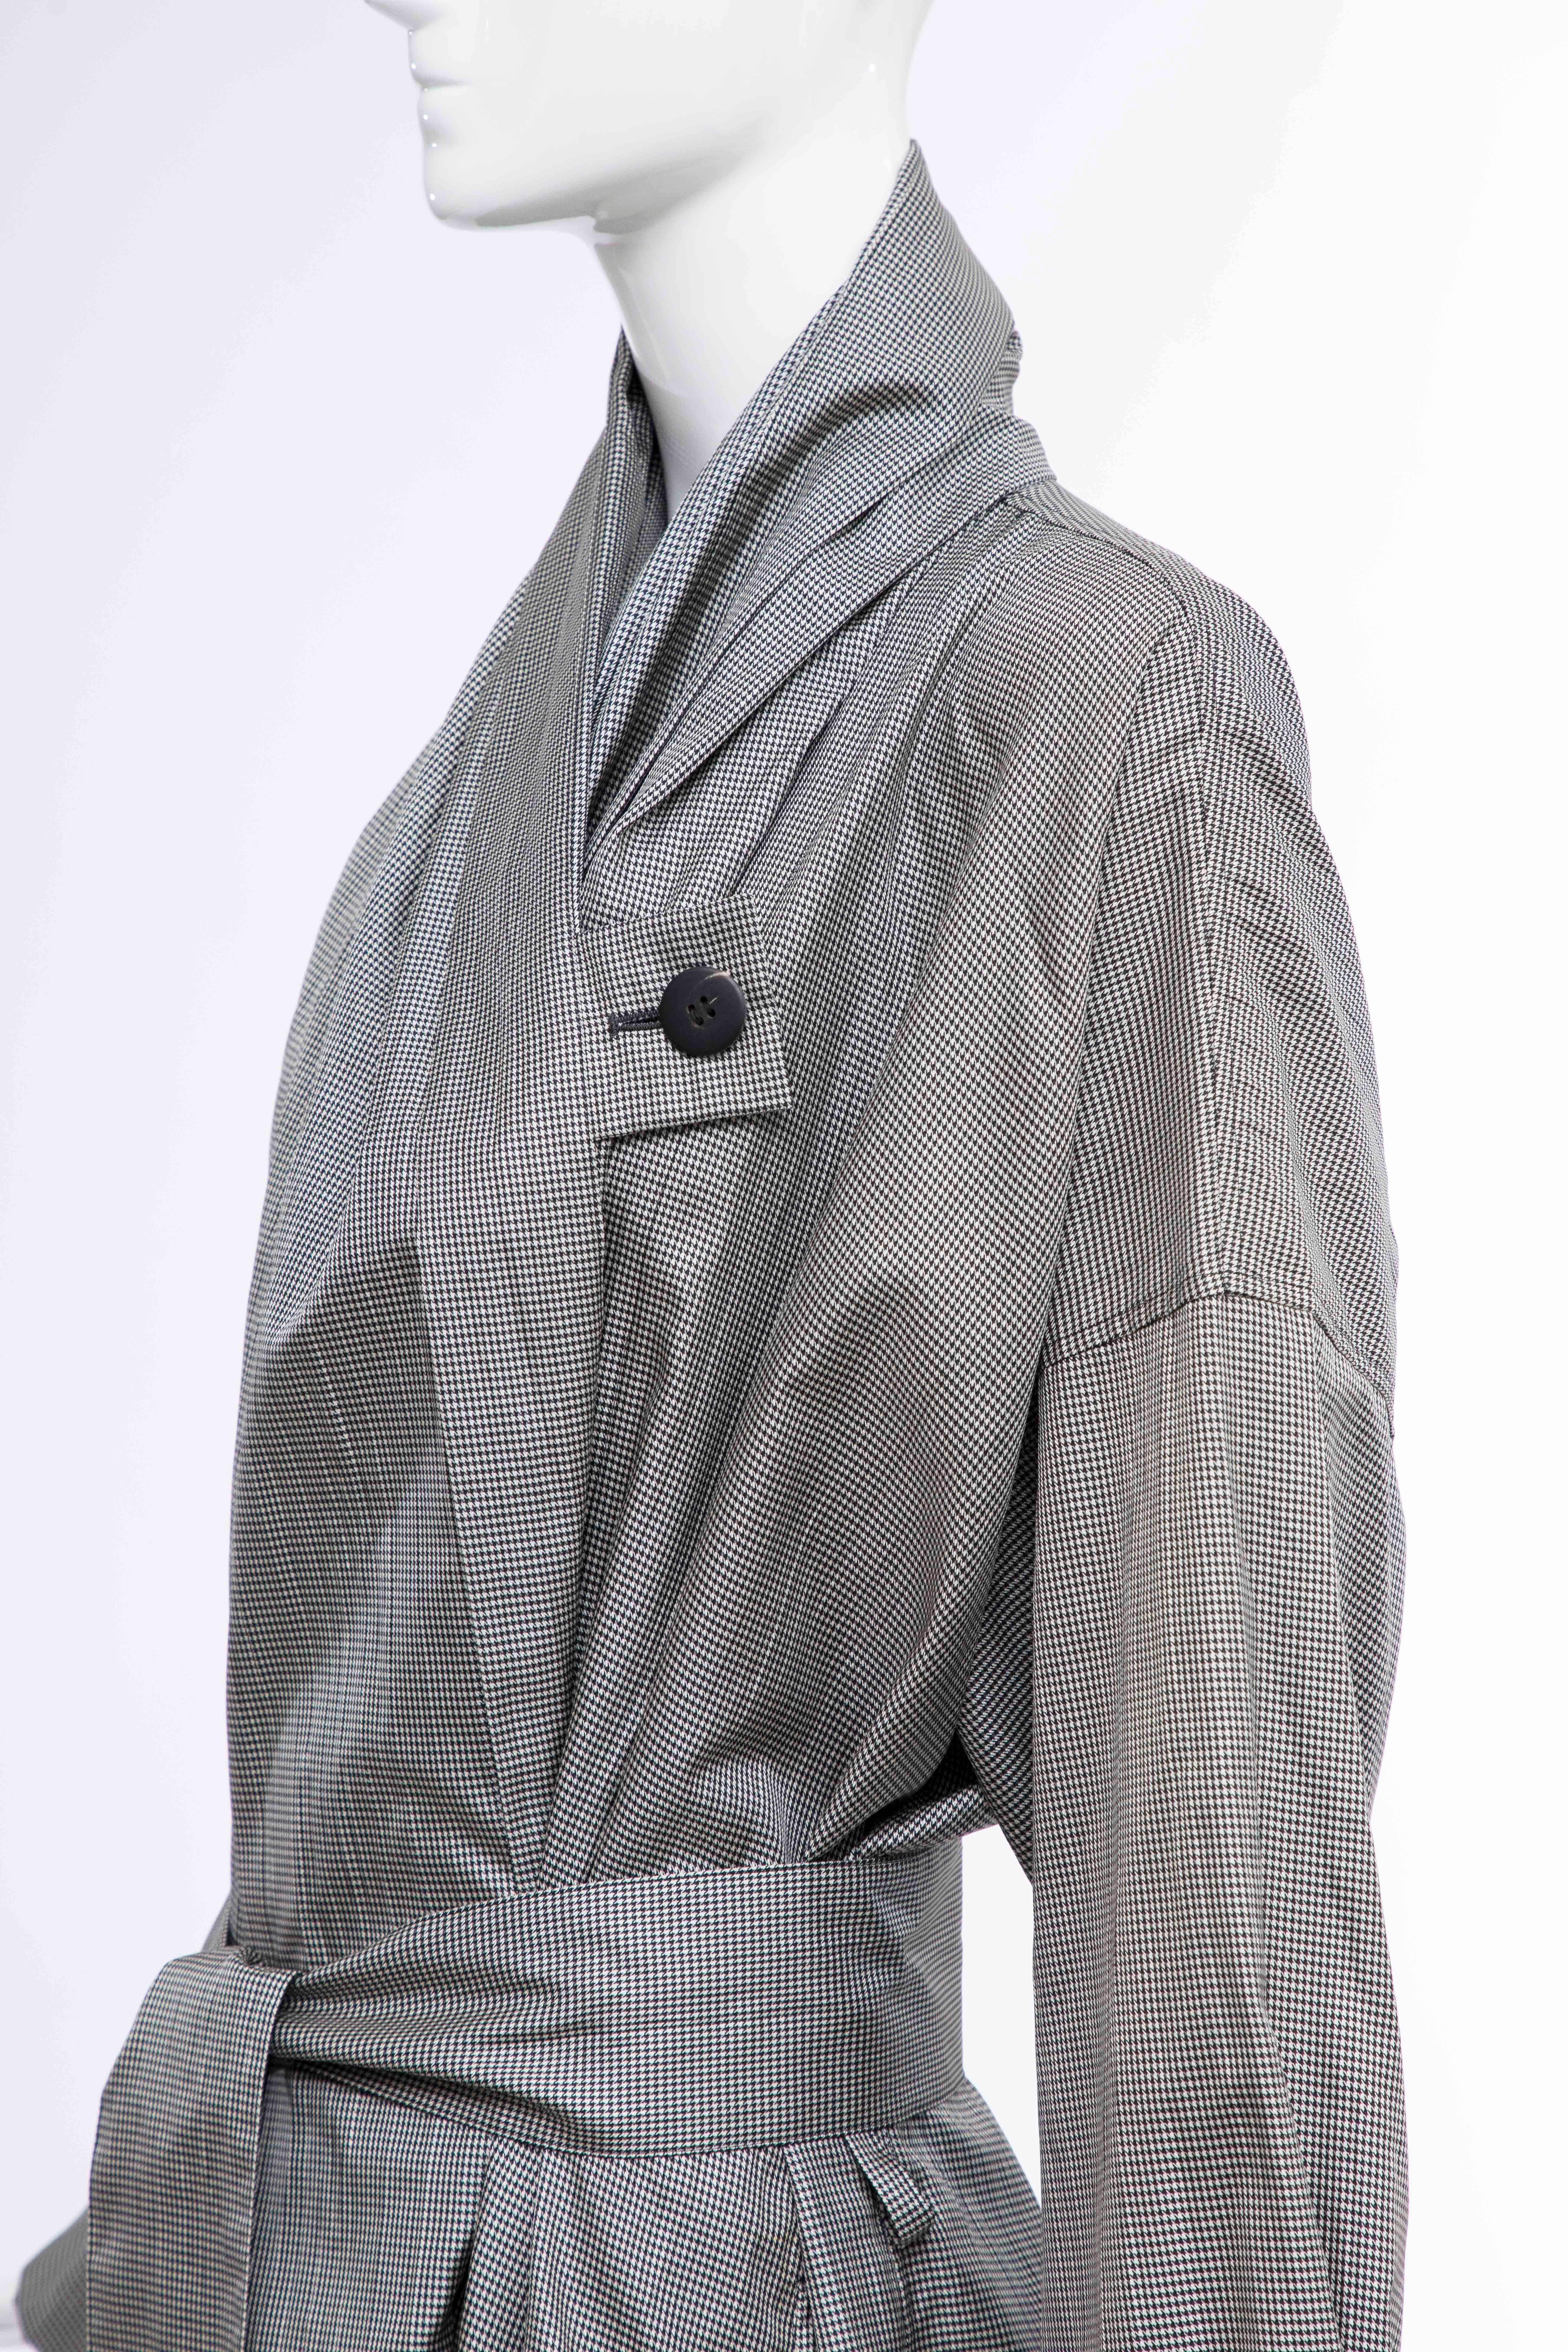 Women's Issey Miyake Houndstooth Trench Coat Metropolitan of Art Collection, Circa 1985 For Sale